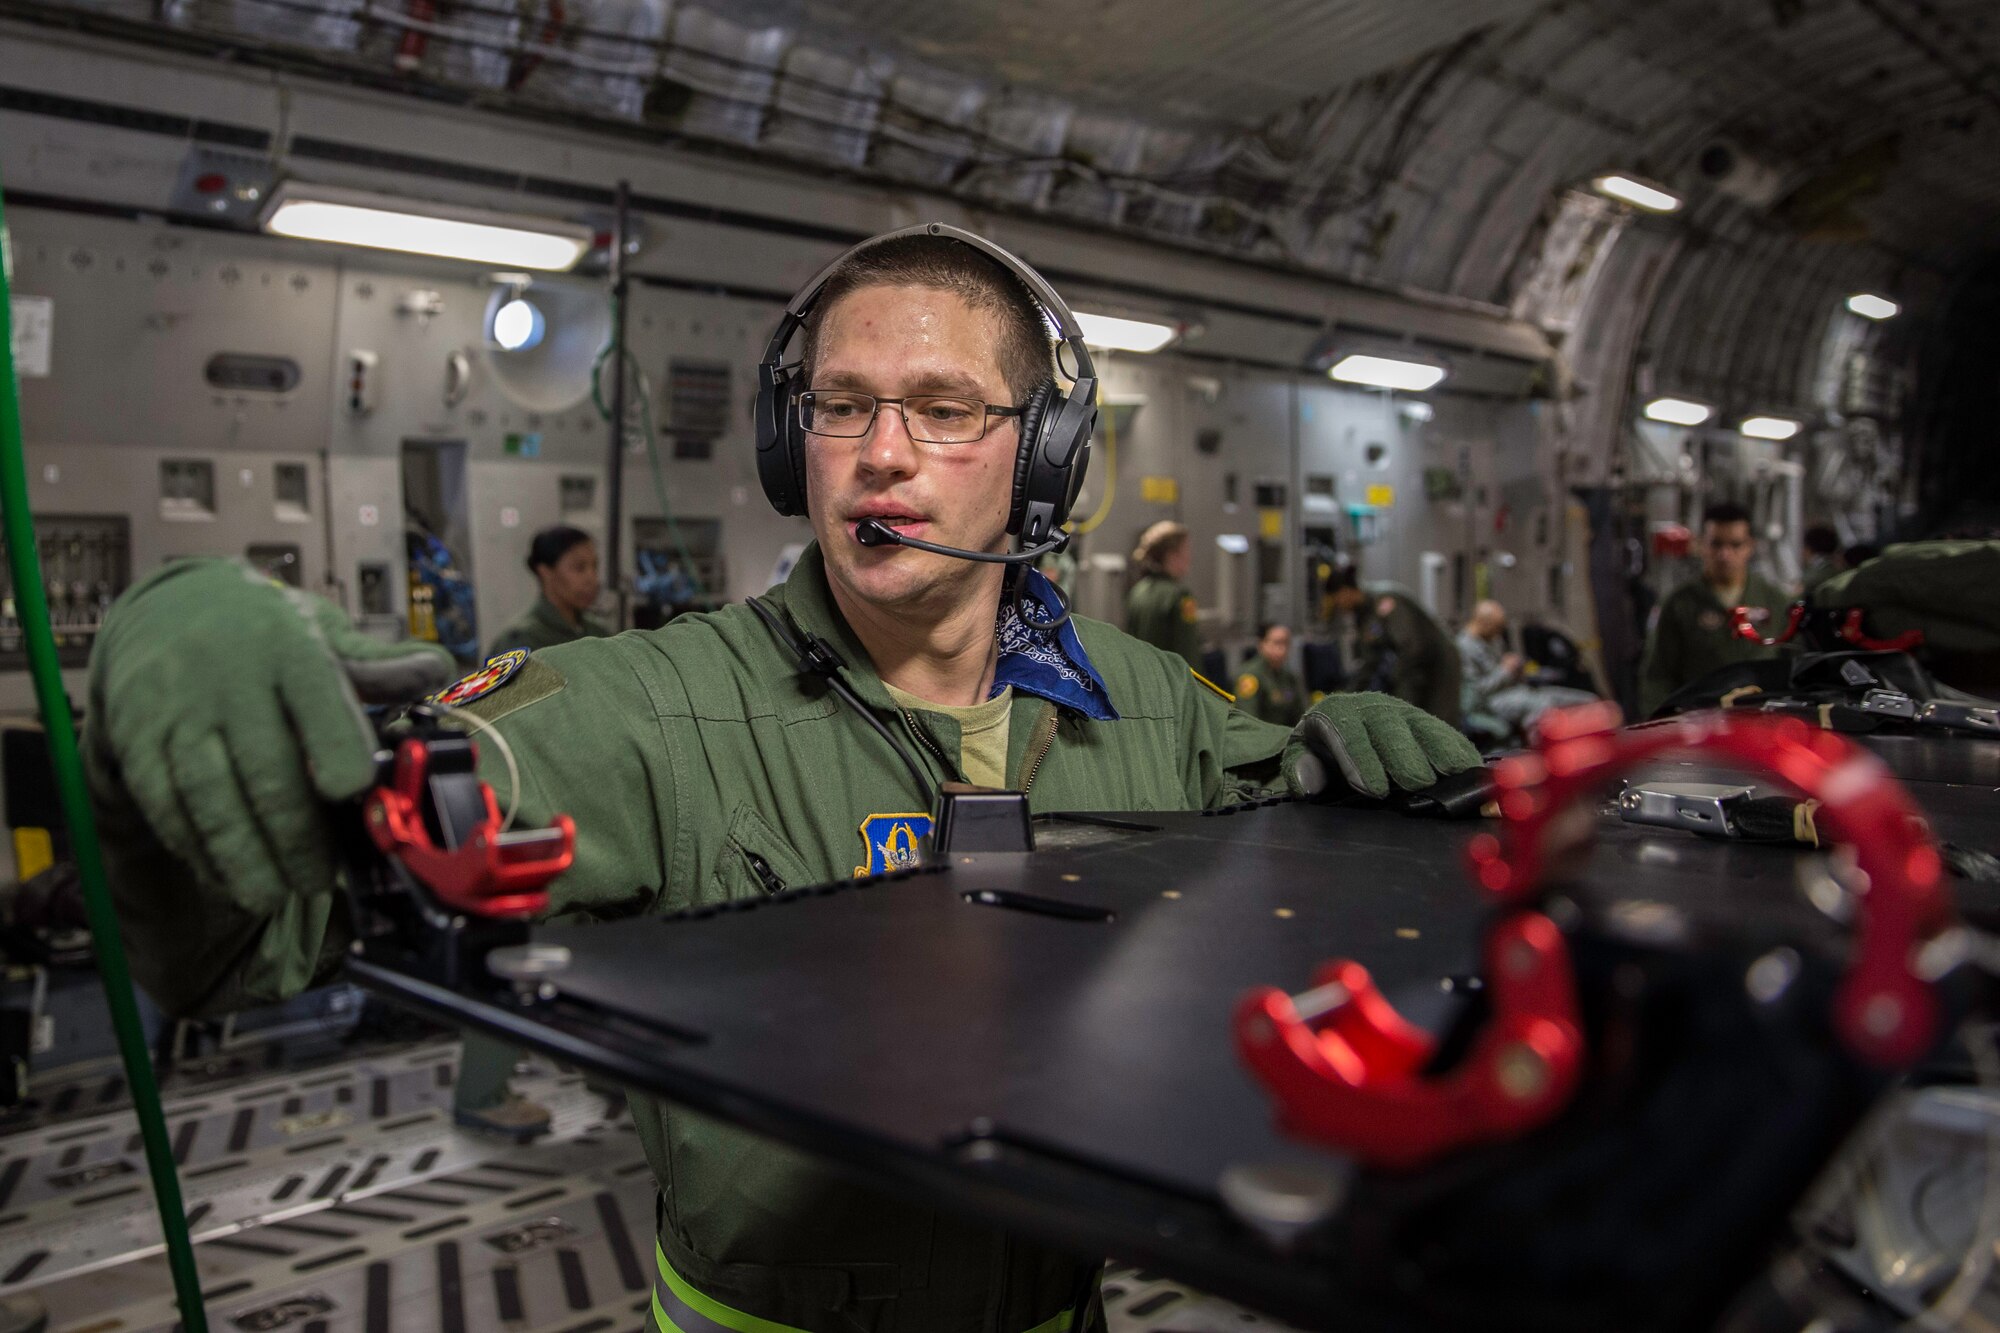 Tech. Sgt. James Laska finishes configuring a newly approved C-17 stanchion litter system Feb. 22, 2015 during a training mission in San Juan, Puerto Rico. The mission was part of a three day fly-away with Airmen from the 315th Airlift Wing at Joint Base Charleston, South Carolina and aeromedical Airmen from the 459th Air Refueling Wing at Joint Base Andrews, Maryland. The training mission was a cost-effective means to accomplish currency items and evaluations for flight crew members and provided C-17 familiarization and proficiency training for aeromedical Airmen. Laska is an aeromedical technician with the 459th Aeromedical Evacuation Squadron. (U.S. Air Force Photo/Tech. Sgt. Shane Ellis)
